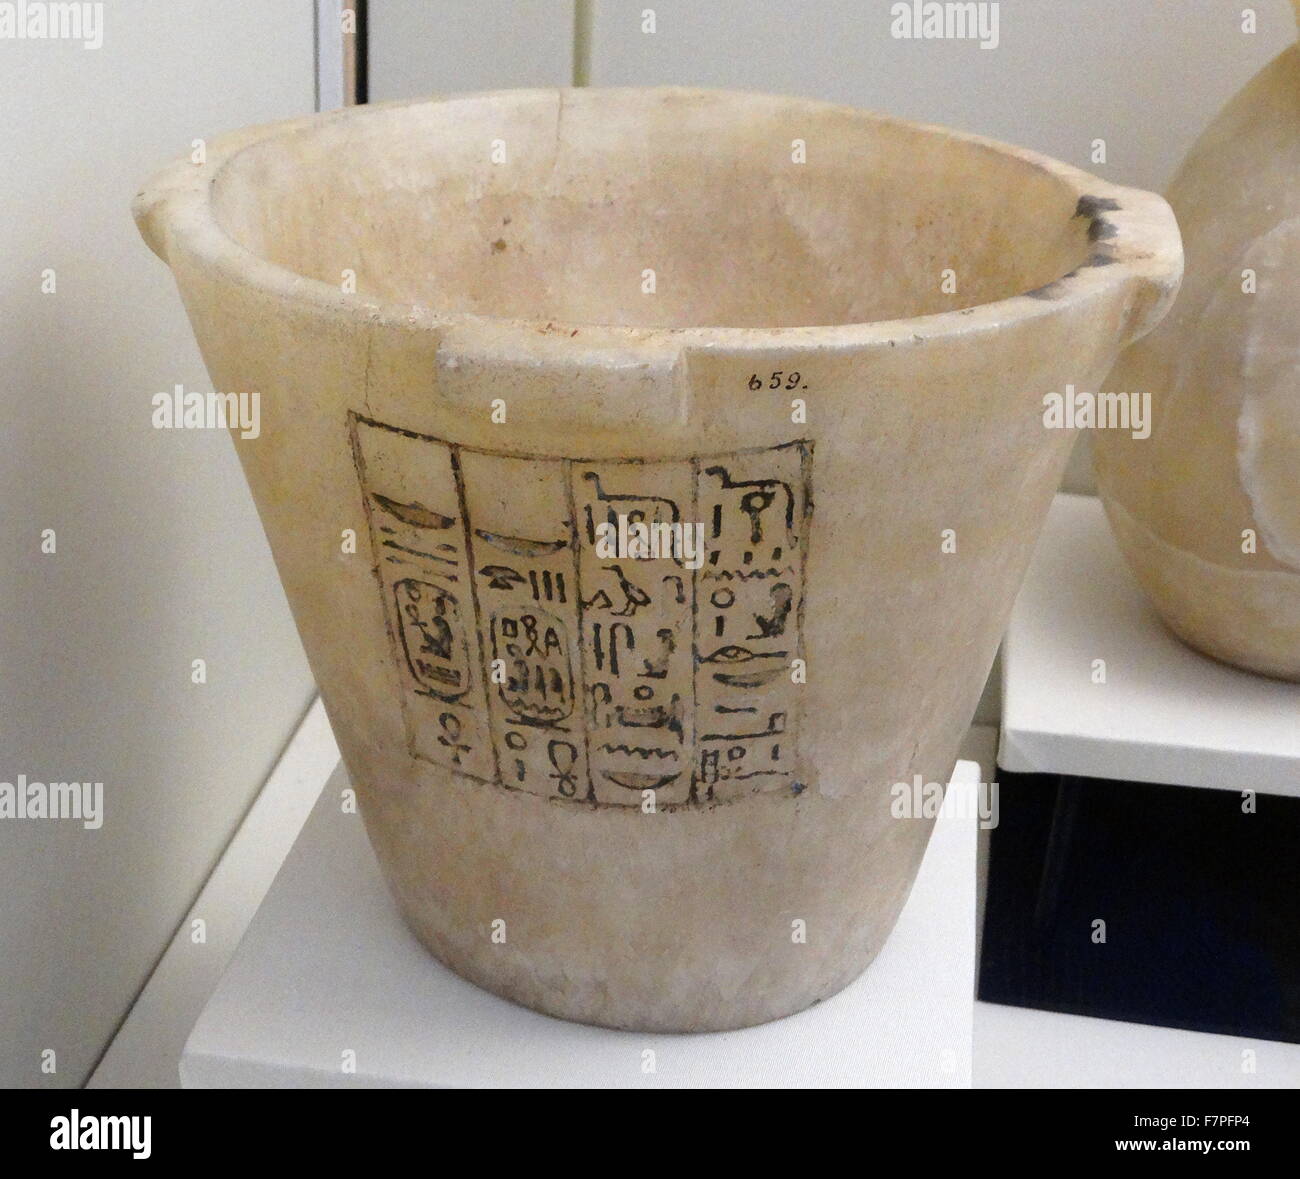 Egyptian 18th dynasty alabaster vessel Stock Photo